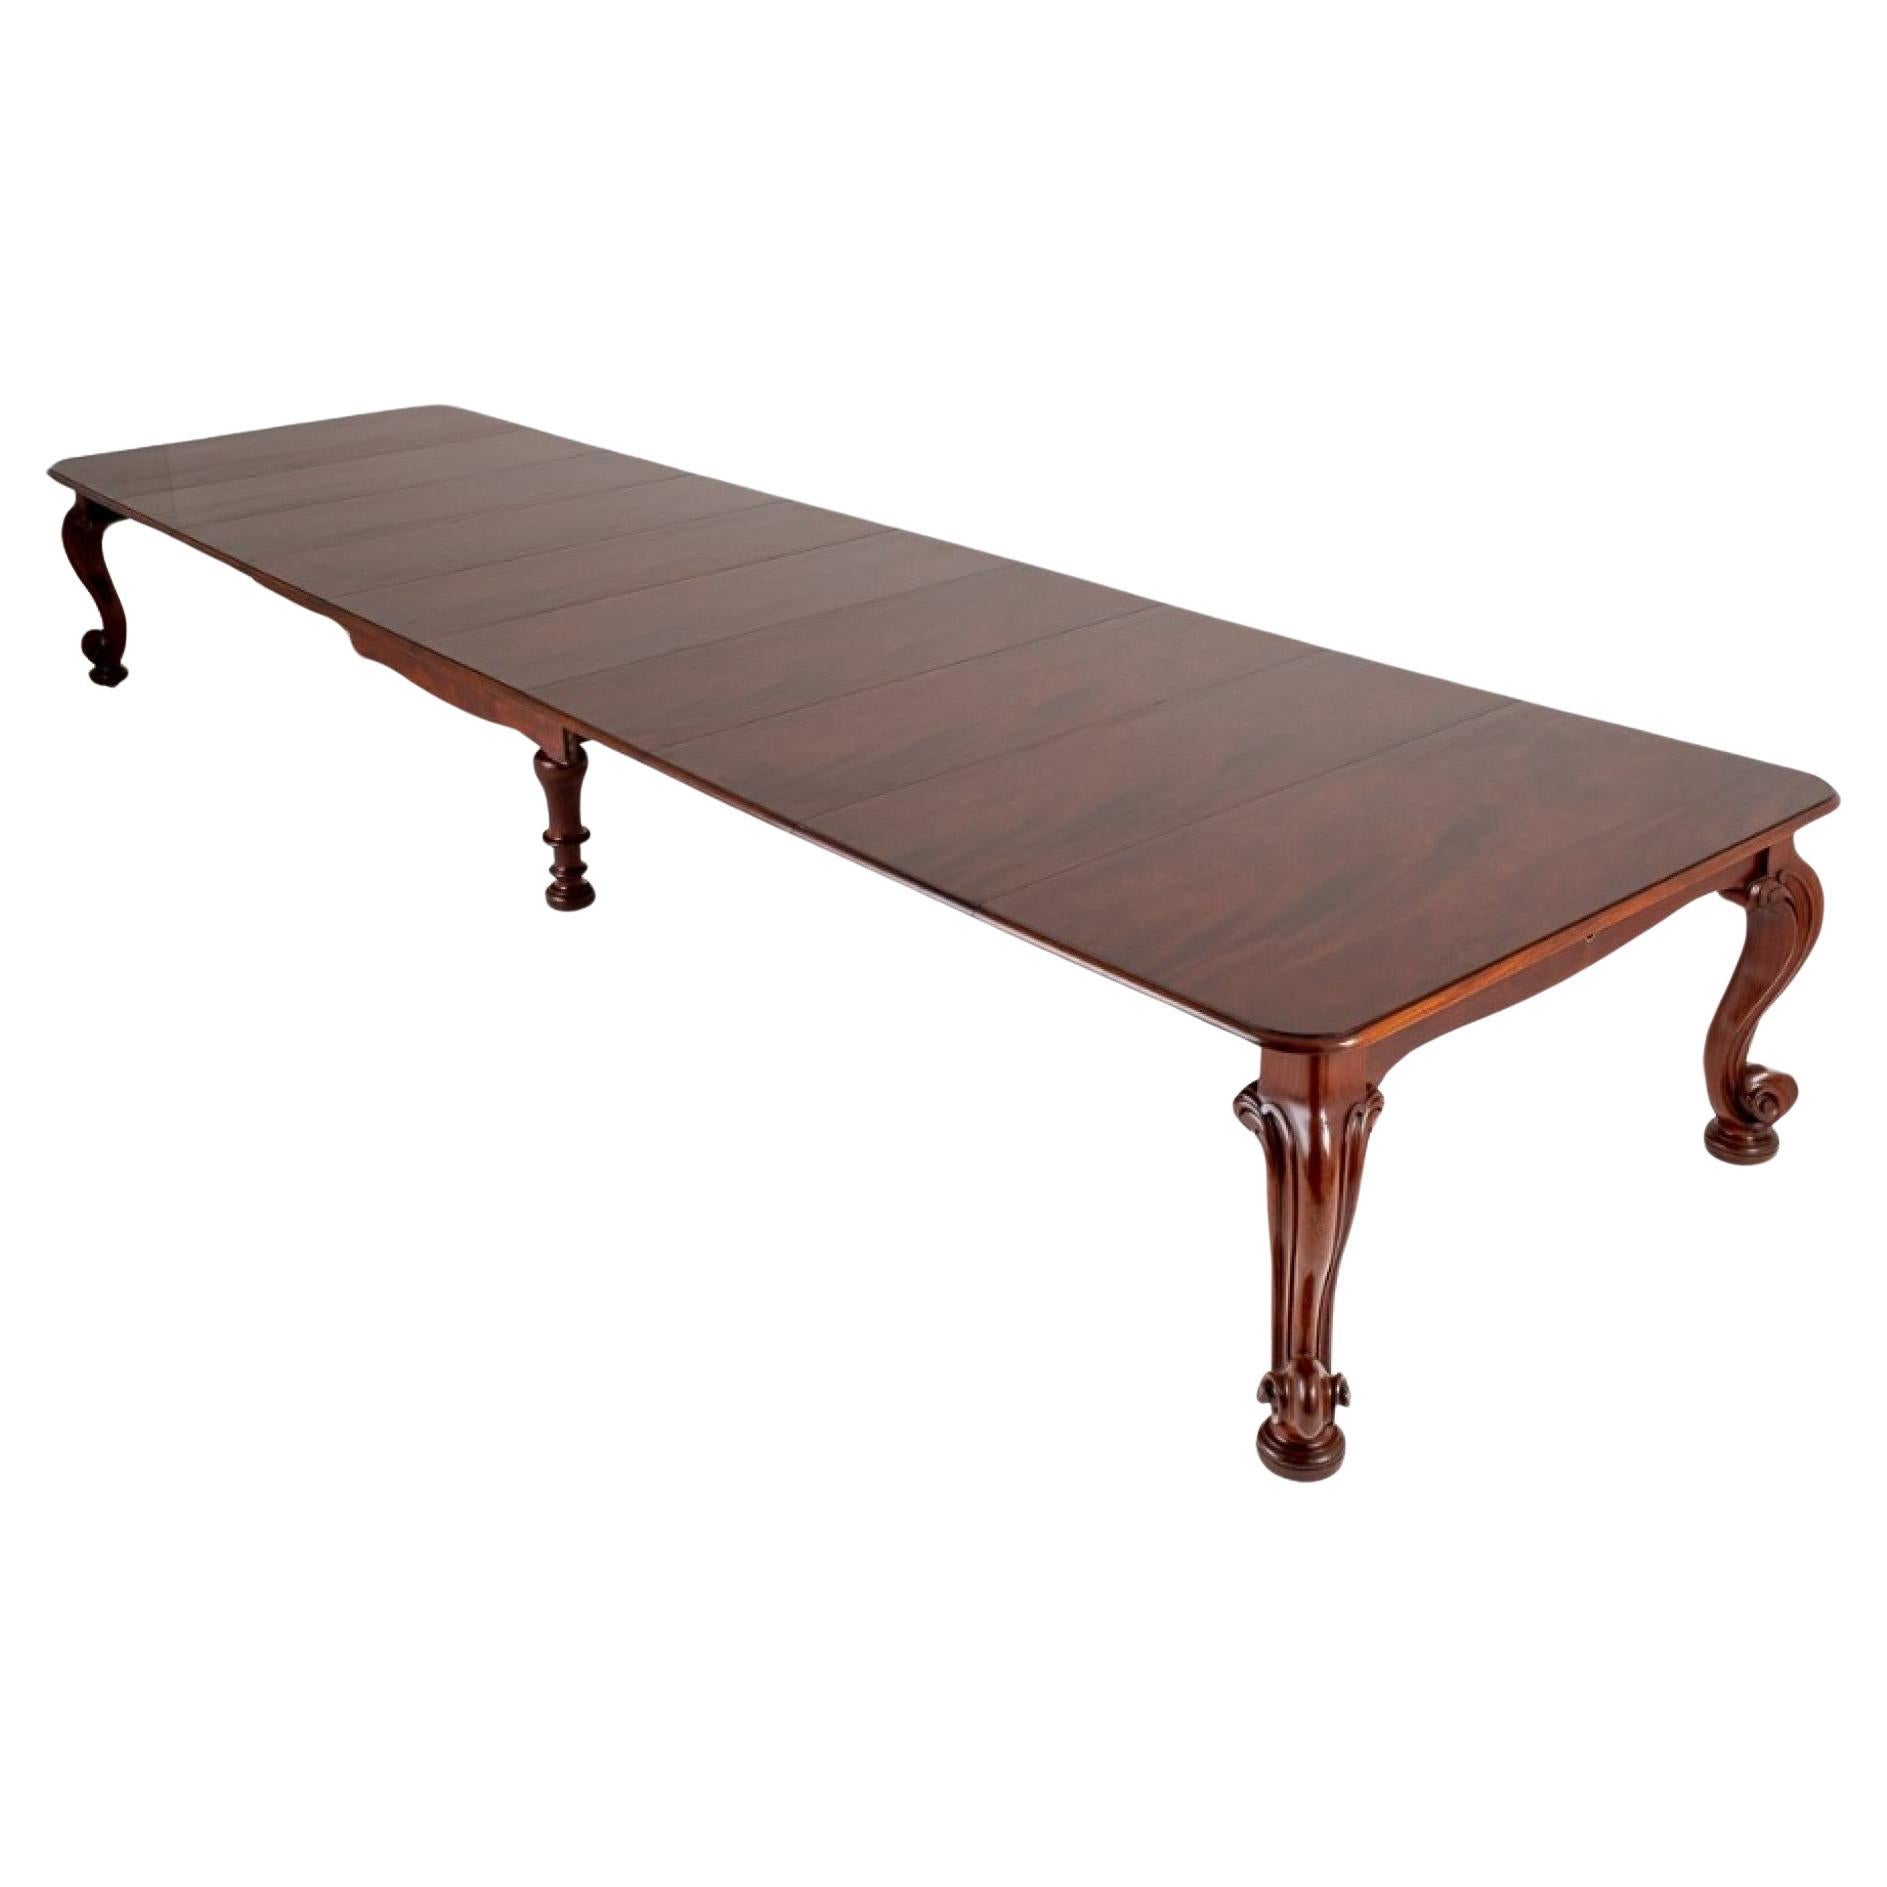 Giant Victorian Dining Table Seats 24 by Samuel Hawkins 1860 For Sale